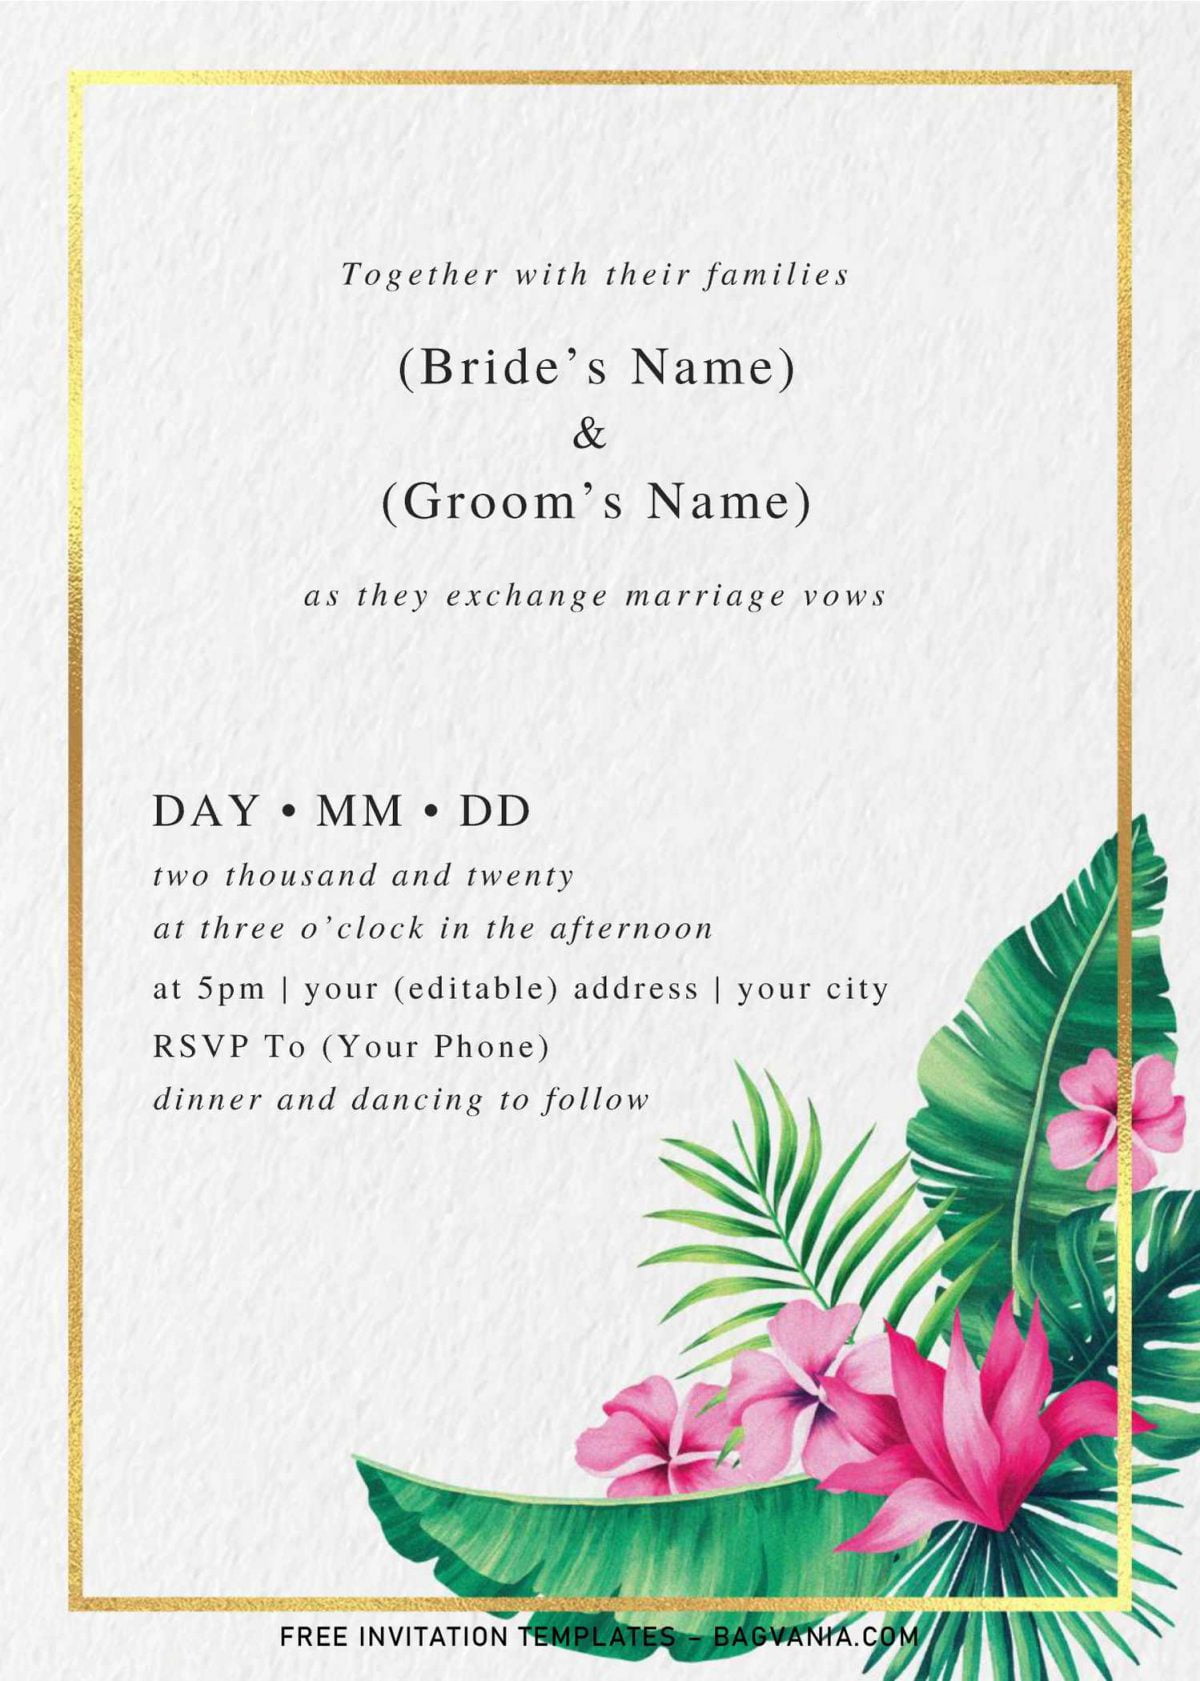 Modern Tropical Wedding Invitation Templates - Editable With MS Word and has portrait orientation